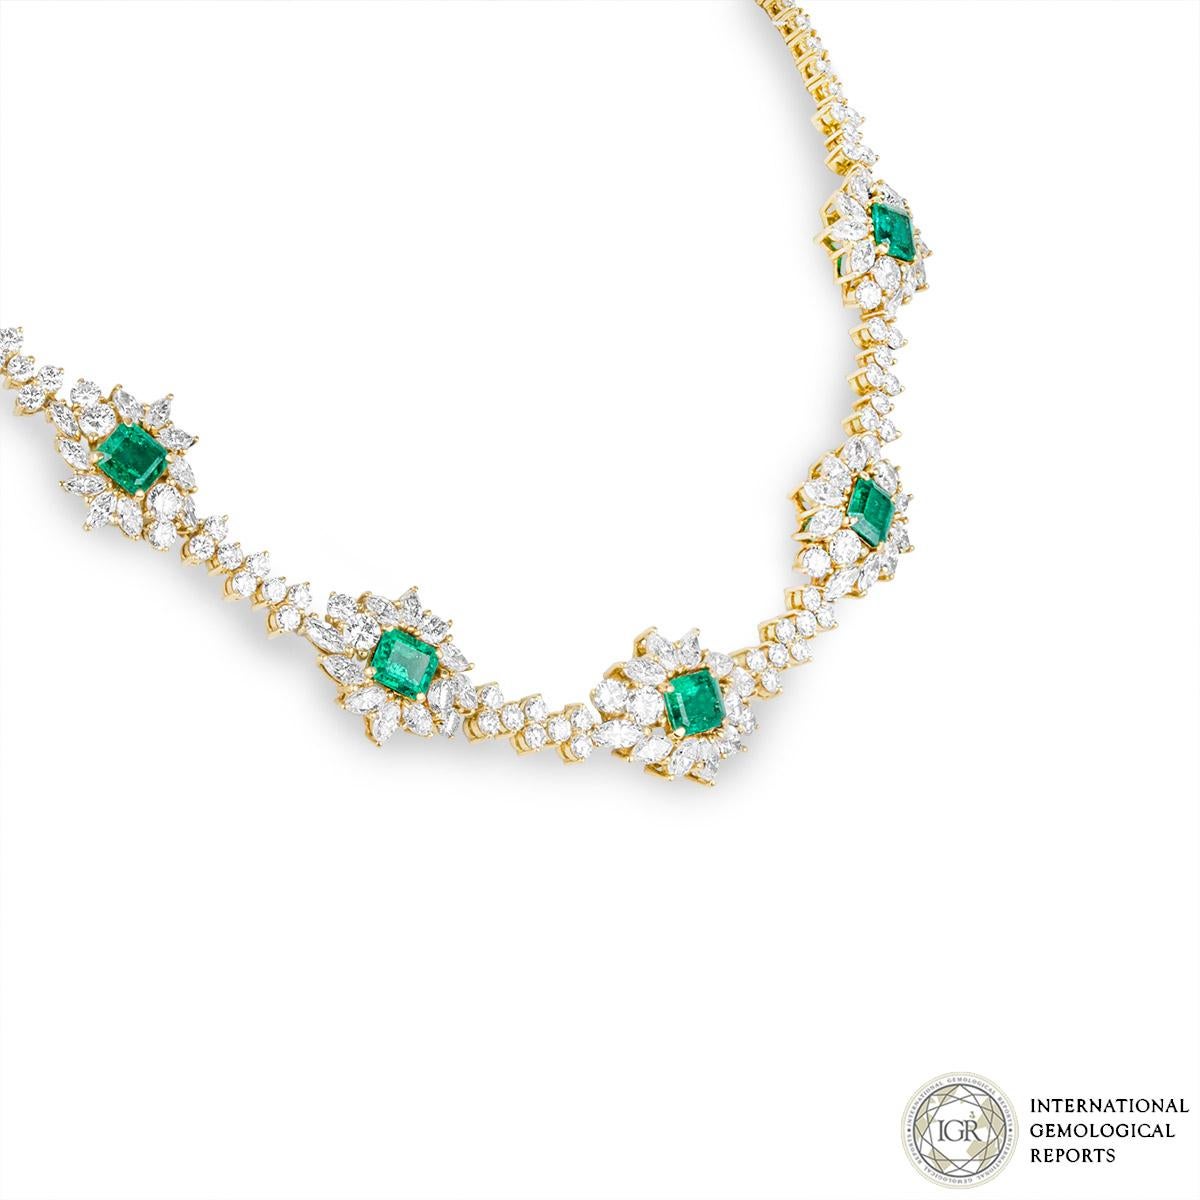 A stunning emerald and diamond necklace in 18k yellow gold. The main body of the necklace features 5 square mixed cut natural emeralds of Columbian origin. The emeralds have a total weight of approximately 5.04ct and display a strong green colour.